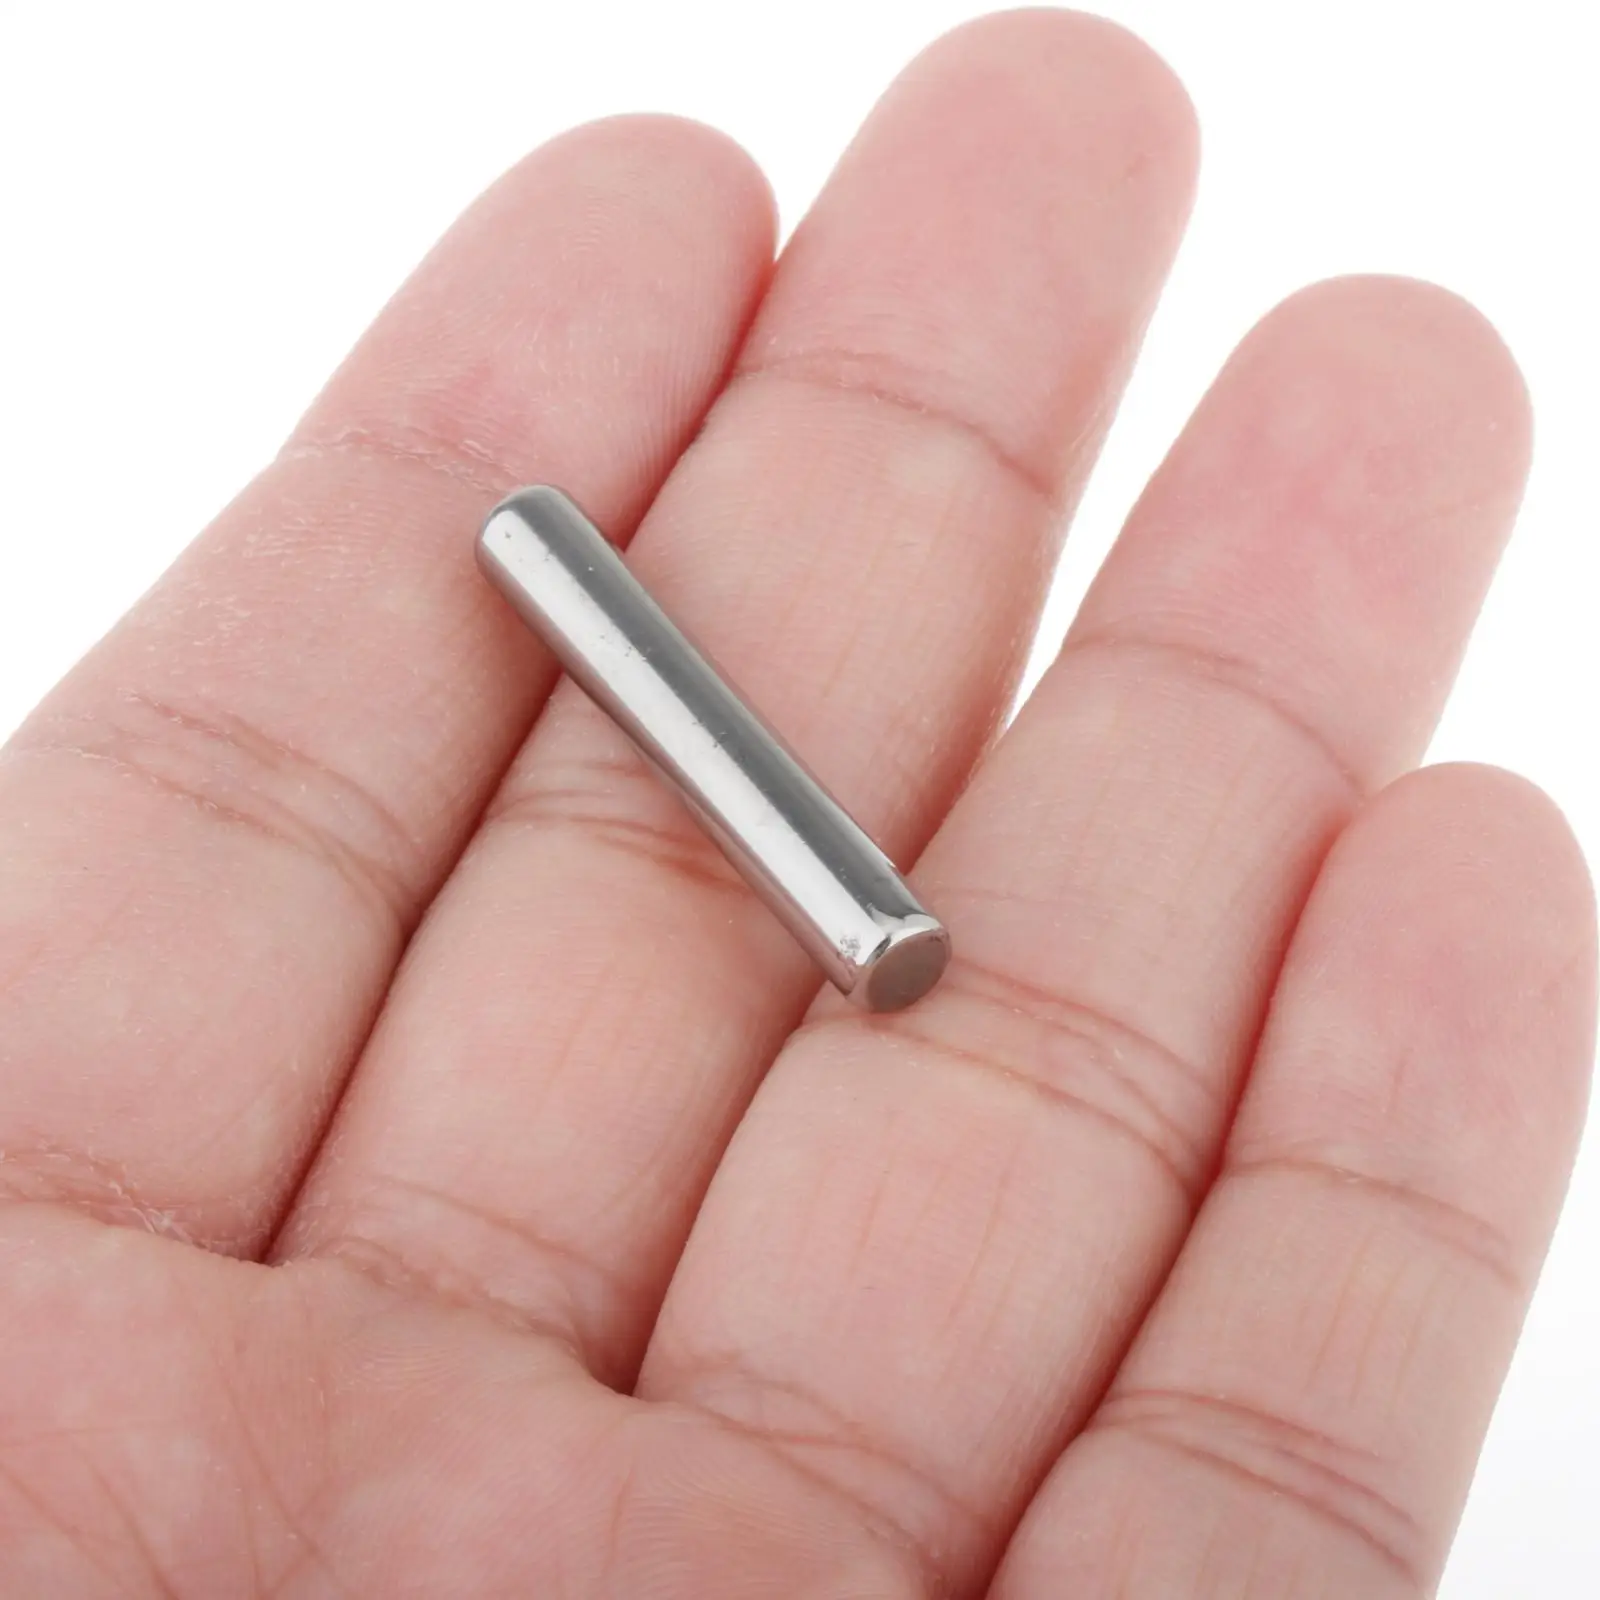 Straight Pin 90250-05010-00 Durable Drive Pin for Outboard Motor